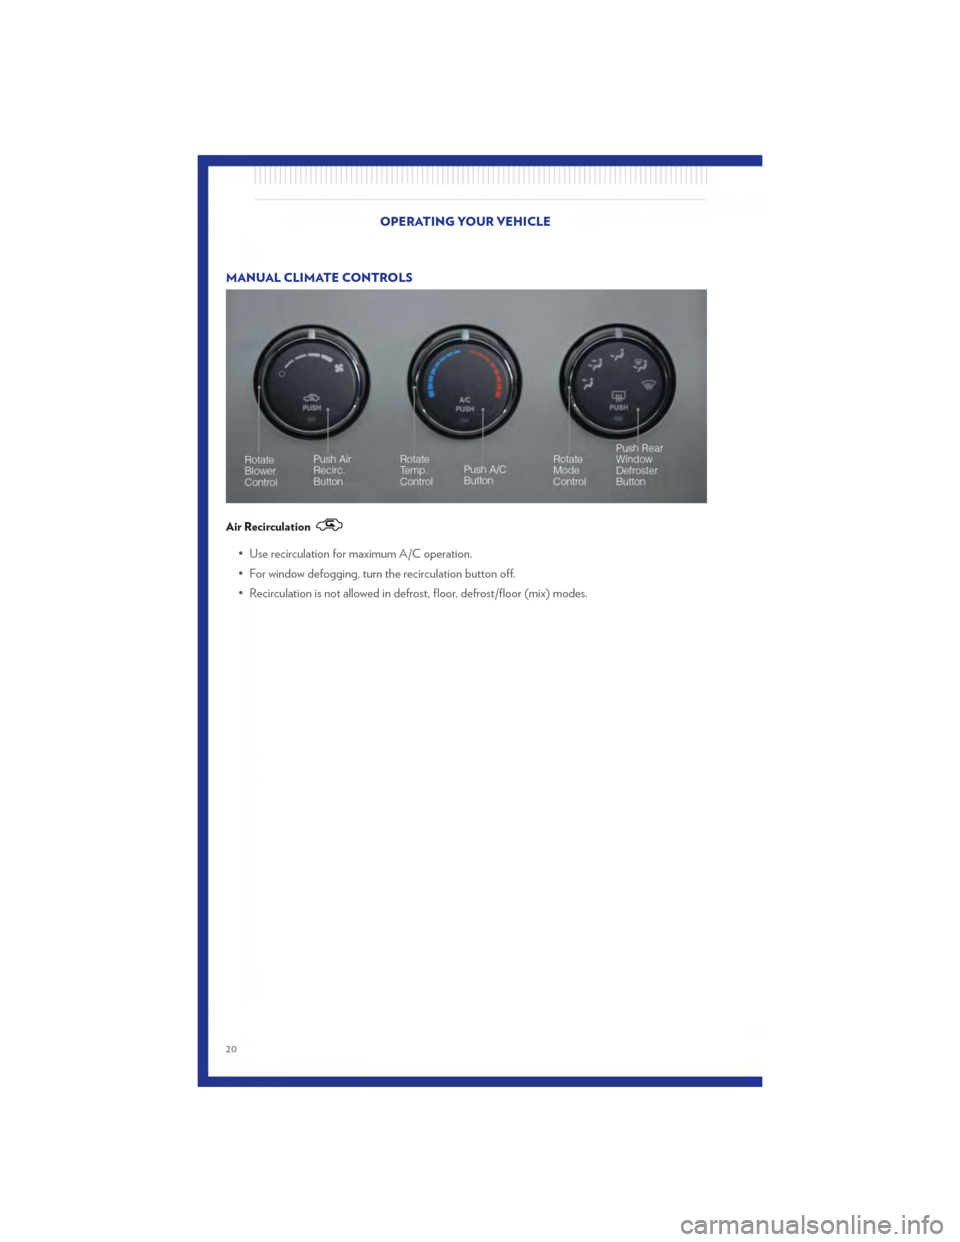 CHRYSLER 200 2011 1.G User Guide MANUAL CLIMATE CONTROLS
Air Recirculation
• Use recirculation for maximum A/C operation.
• For window defogging, turn the recirculation button off.
• Recirculation is not allowed in defrost, flo